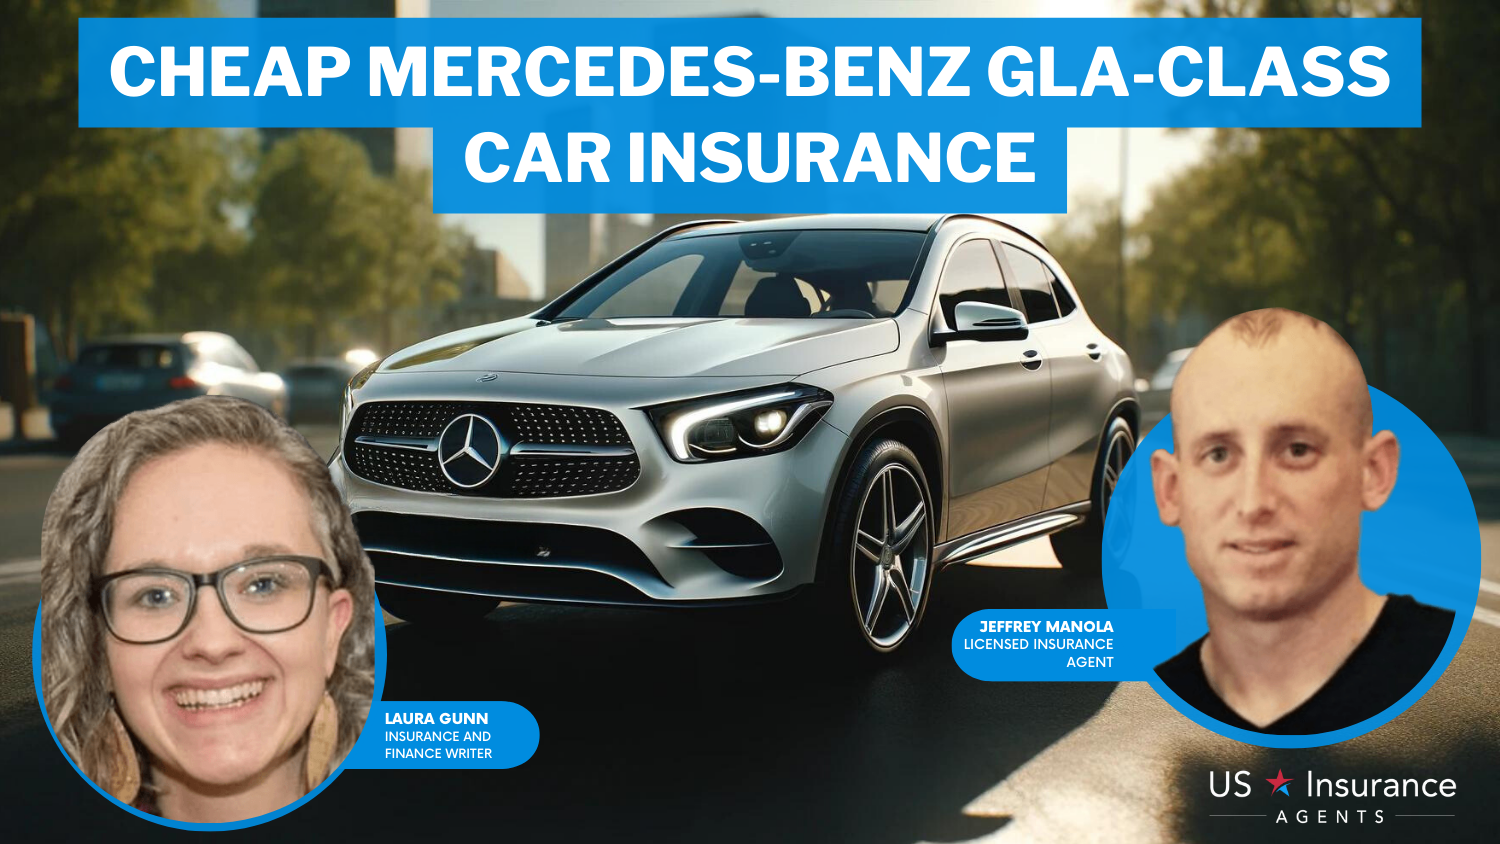 Cheap Mercedes-Benz GLA-Class Car Insurance: State Farm, The Hartford, and American Family